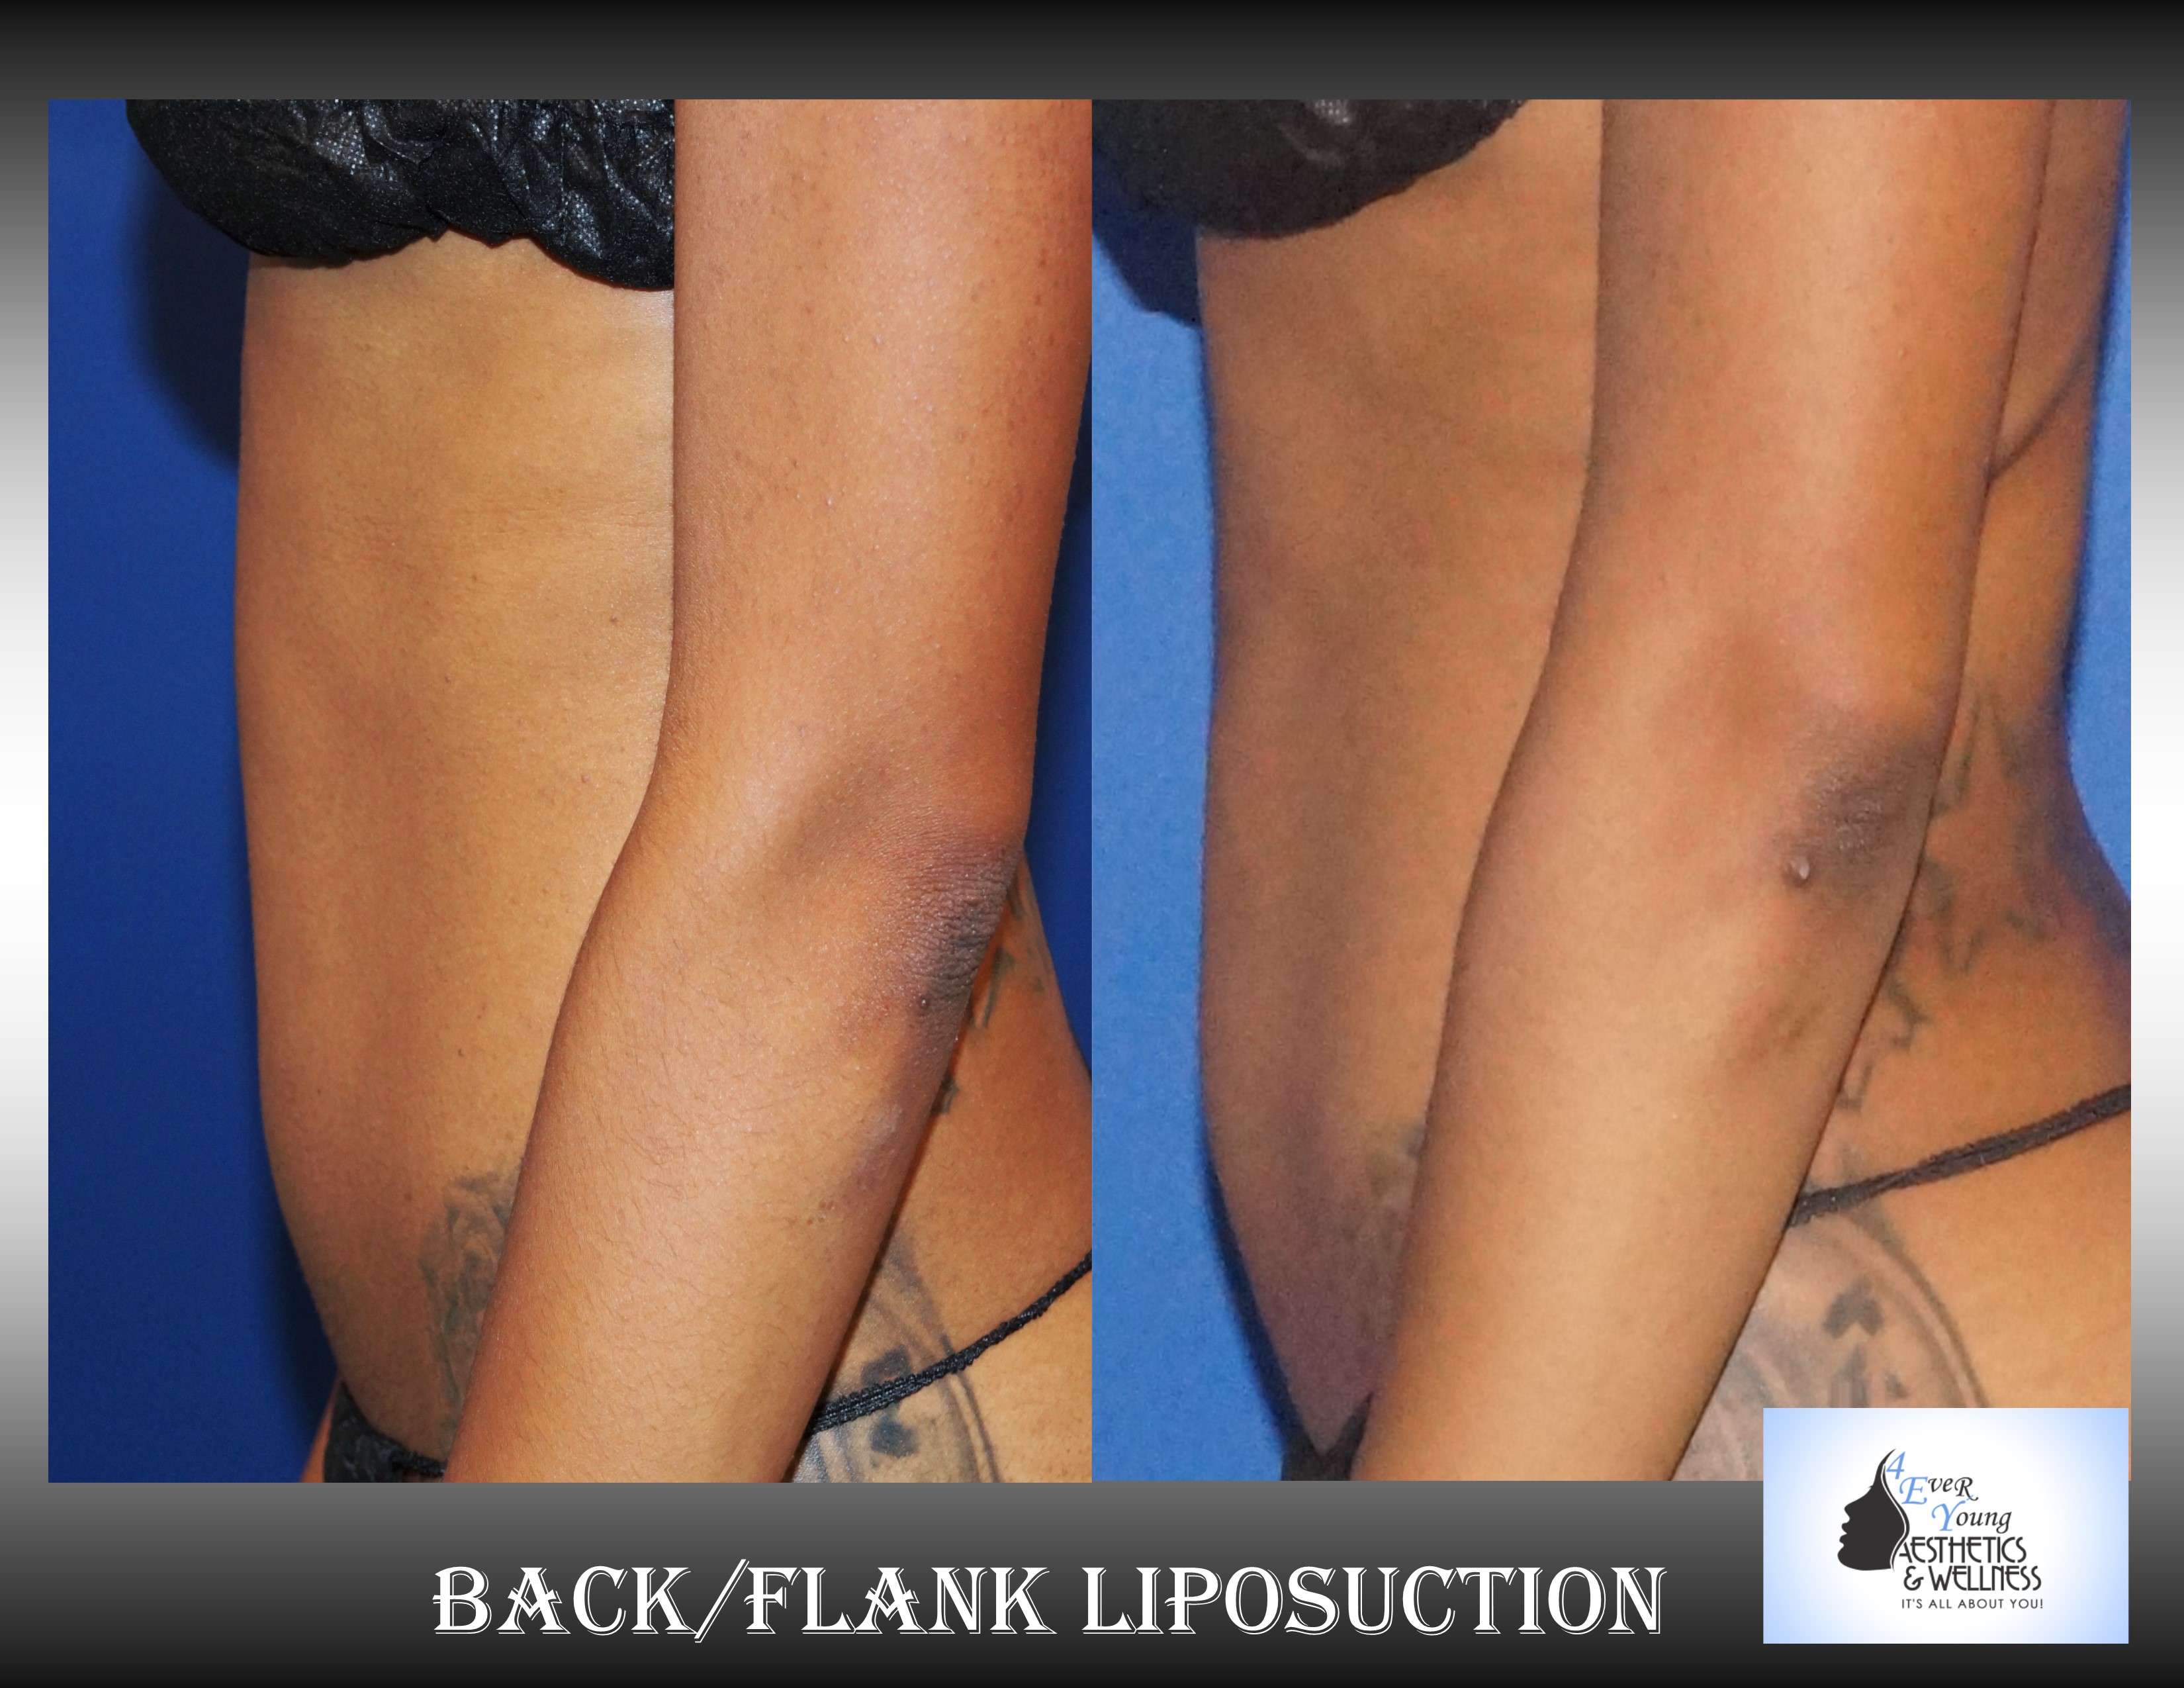 Atlanta liposuction, Liposuction is performed using tumescent anesthesia and traditional liposuction plastic surgery.  We are experts in laser liposuction (smartlipo), vaser liposuction and fat transfer, also known as fat grafting.  Our board-certified cosmetic surgeon is an expert at fat removal with liposuction which is an enhancement surgery and doesn’t fall into the scope of practice of a board-certified plastic surgeon who is trained in reconstructive surgery.  Board-certified plastic surgeons with experience in liposuction are certainly qualified to perform the procedure but being trained strictly in plastic surgery is misleading.  We use abdominal liposuction, flank liposuction, back liposuction, arm liposuction, thigh liposuction and ankle liposuction to remove unsightly fat from problem areas with our tumescent liposuction procedures with or without sedation. If you desire we use autologous fat transfer (fat grafting) to use the fat obtained as the most natural dermal filler unlike synthetic fillers (Restylane, Juvederm, Sculptra, Radiesse, Belotero, Perlane) to improve fine lines and wrinkles of the face, hand rejuvenation with fat, fat transfer to breast, Brazilian Butt Lift (Butt Augmentation), liposculpture, lip augmentation with fat.  Fat transfer to the breast can be a great alternative to breast augmentation, saline implants, silicone implants, breast augmentation with mastopexy or just to improve volume in the upper pole of the breast.    